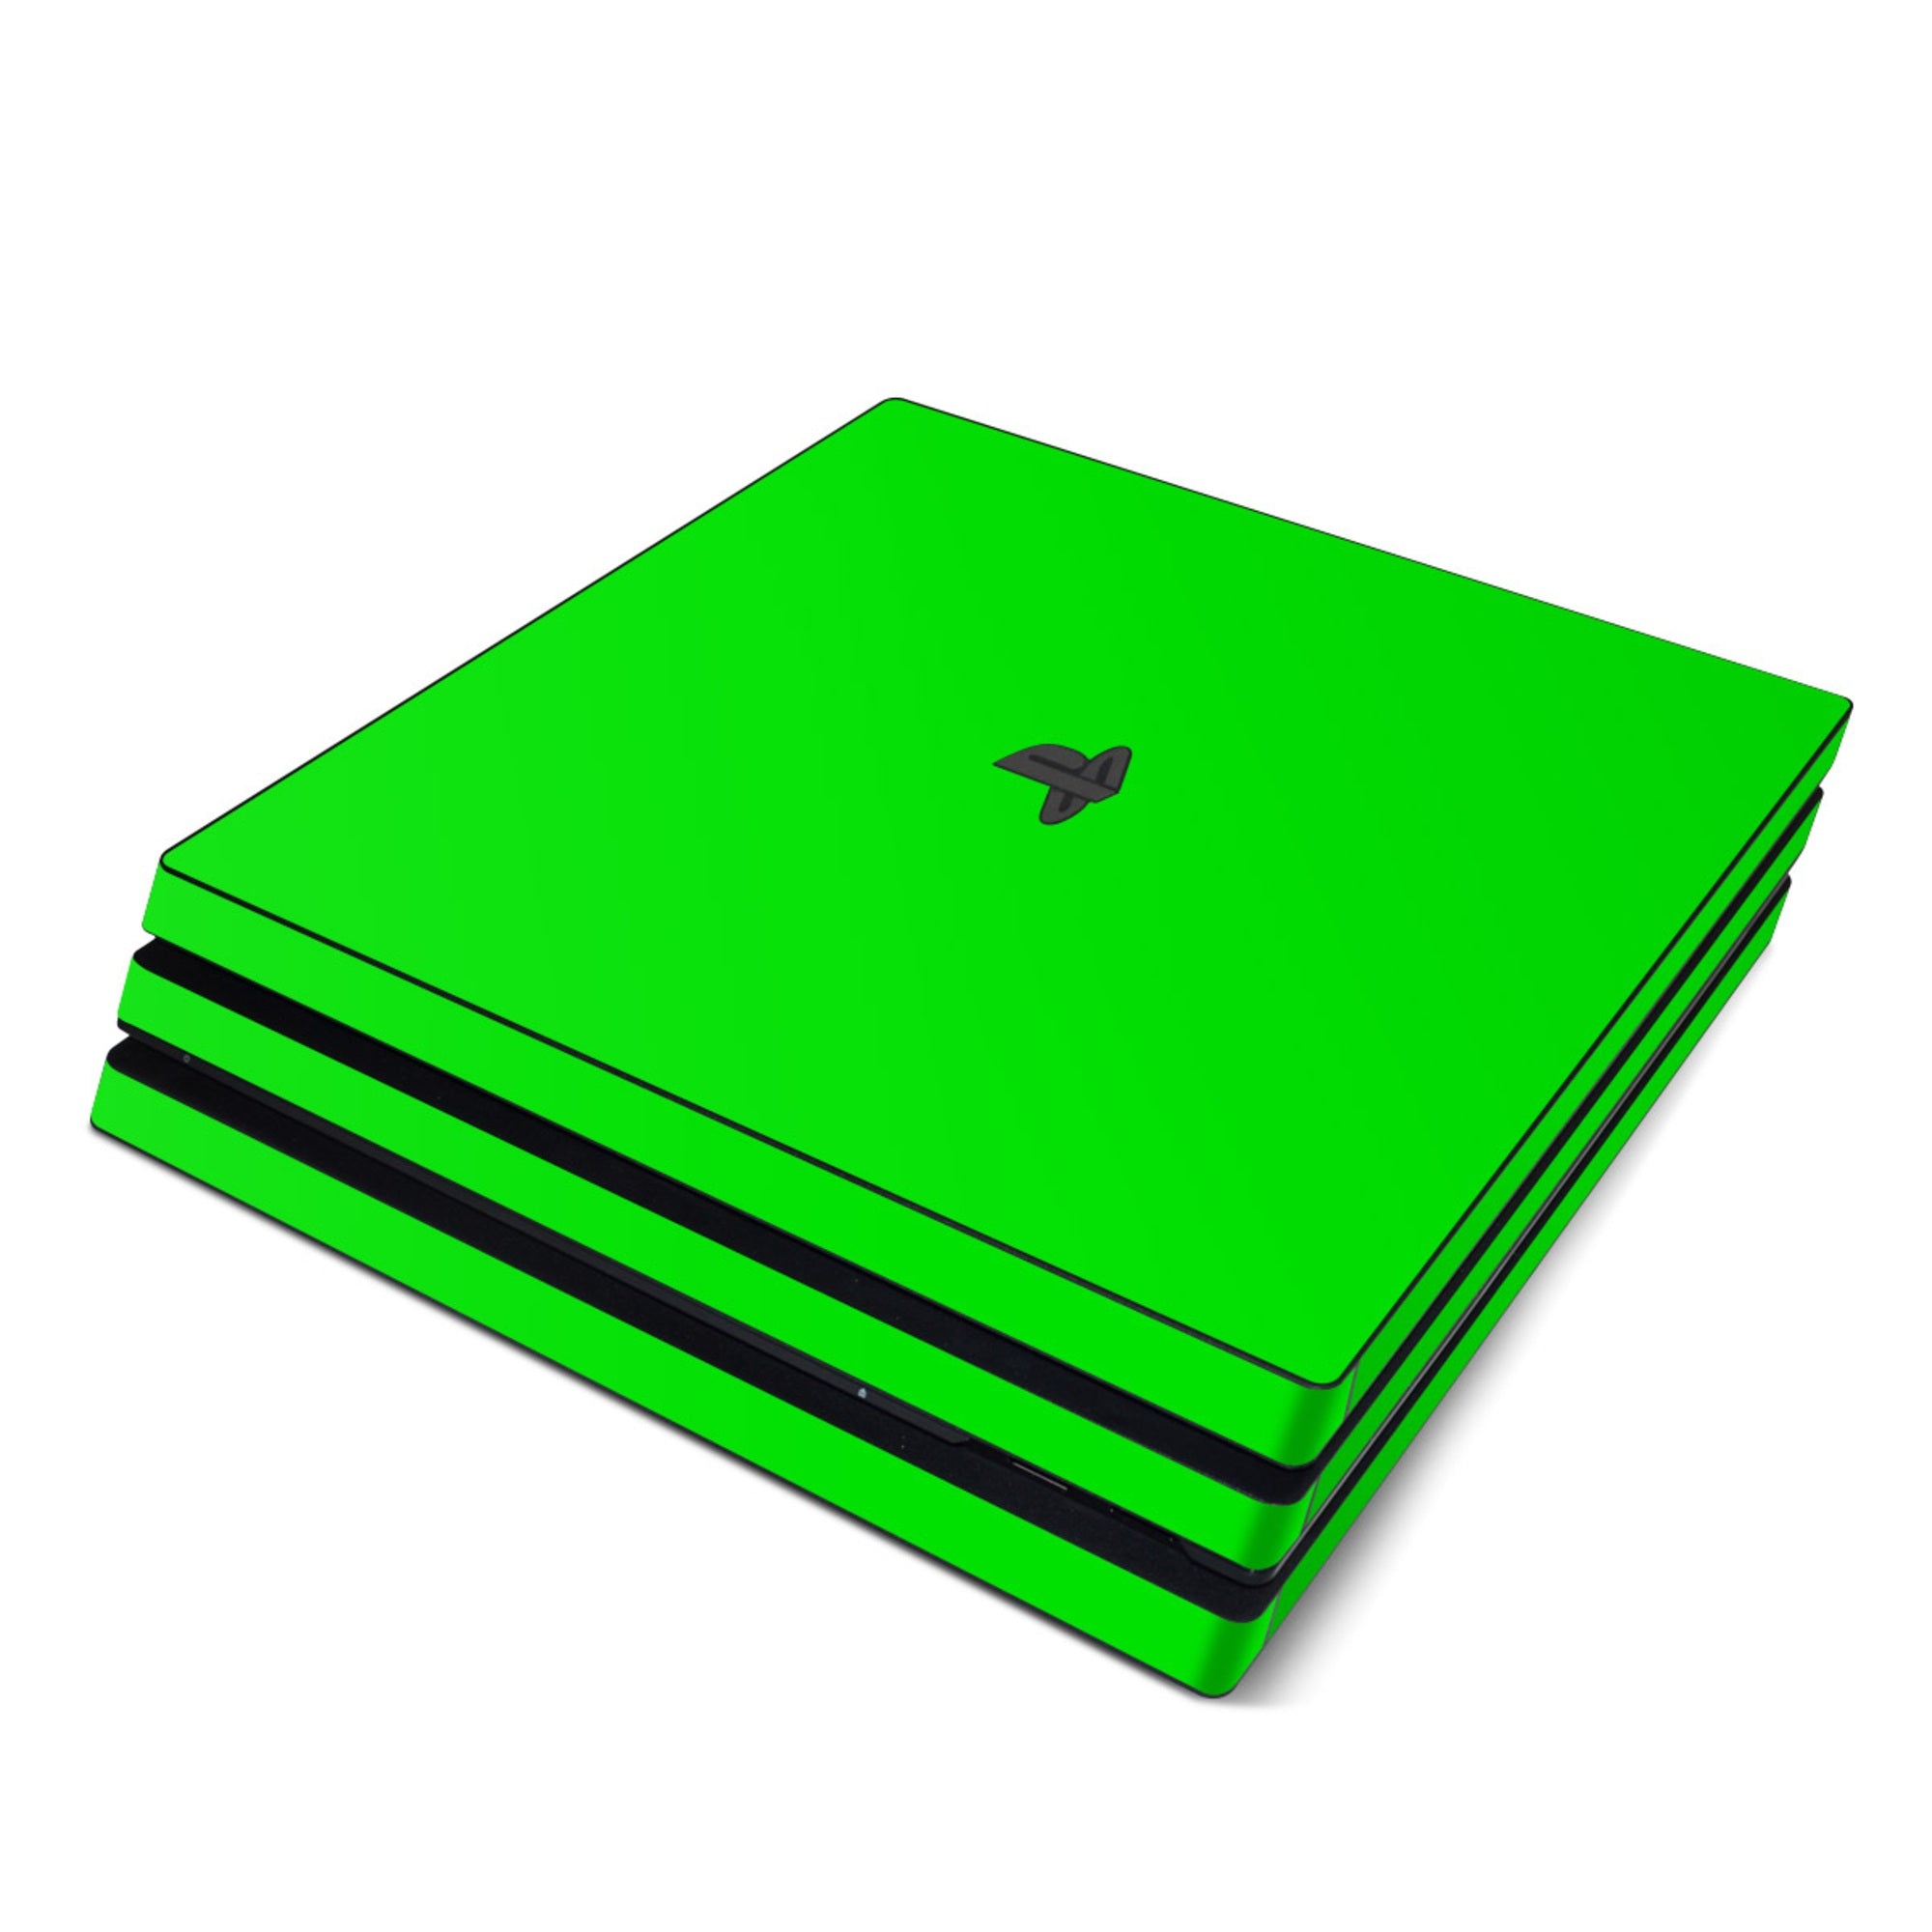 Solid State Slime - Sony PS4 Pro Skin